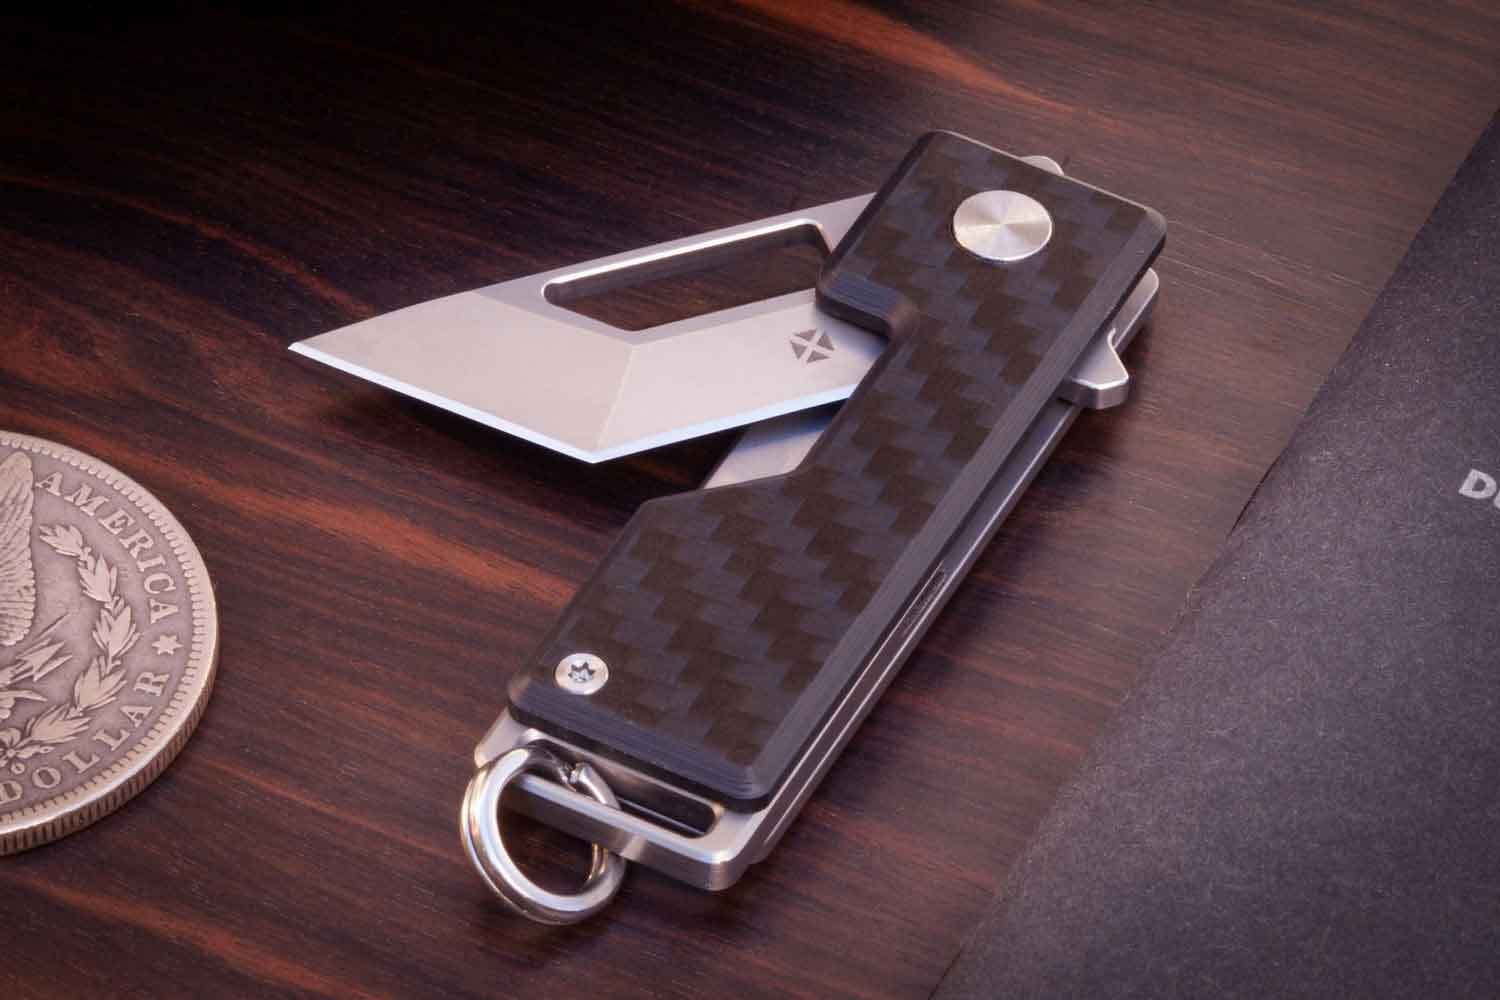 The carbon fiber version of the titanium Pocket Tanto EDC compact pocket knife for your keychain.